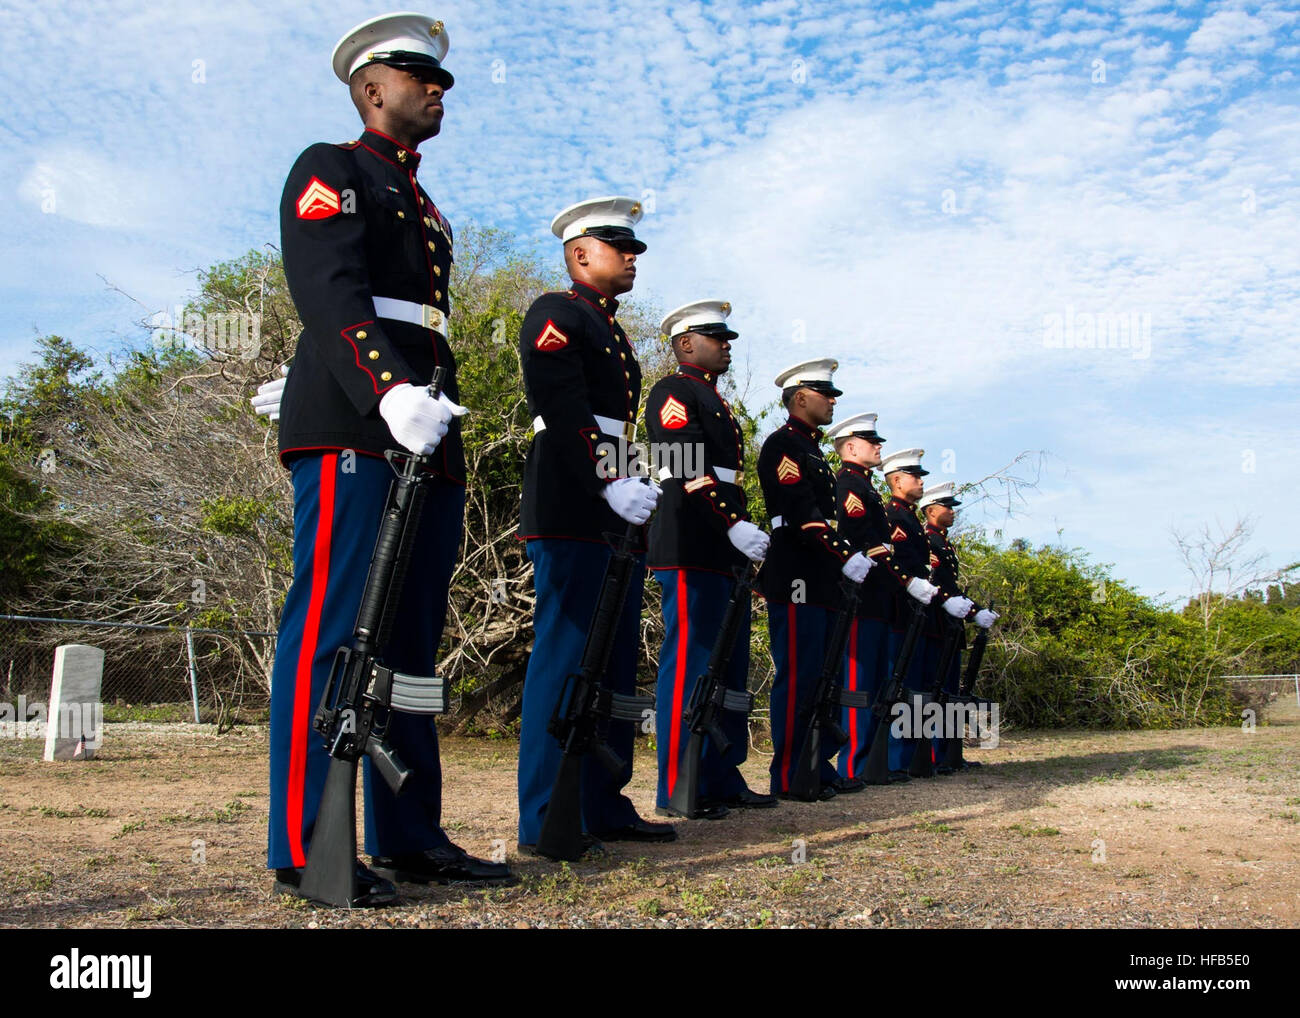 U.S. Marines assigned to a ceremonial firing squad at Naval Station Guantanamo Bay stand by during a Memorial Day ceremony at Cuzco Cemetery in Cuba, May 26, 2014. Cuzco Cemetery, normally closed to the public, is opened to base residents once a year for Memorial Day. (U.S. Navy photo by Mass Communication Specialist 2nd Class Scott Pittman/Released) Cuzco Cemetery ceremony 140526-N-FI736-004 Stock Photo